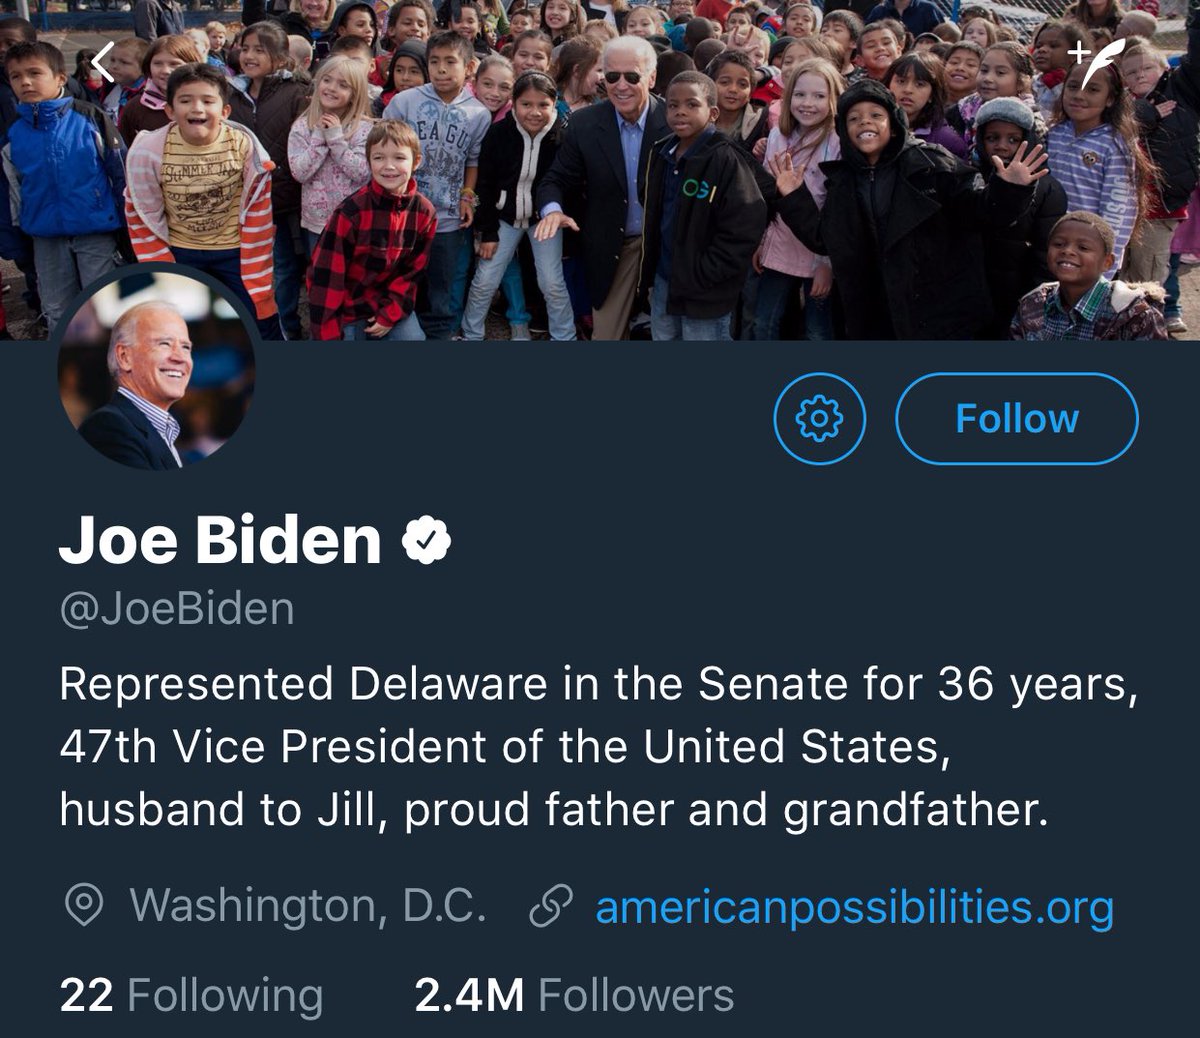 Even the Twitter header from the official account of Joe Biden leaves significant hints. #BidenGropeTapes